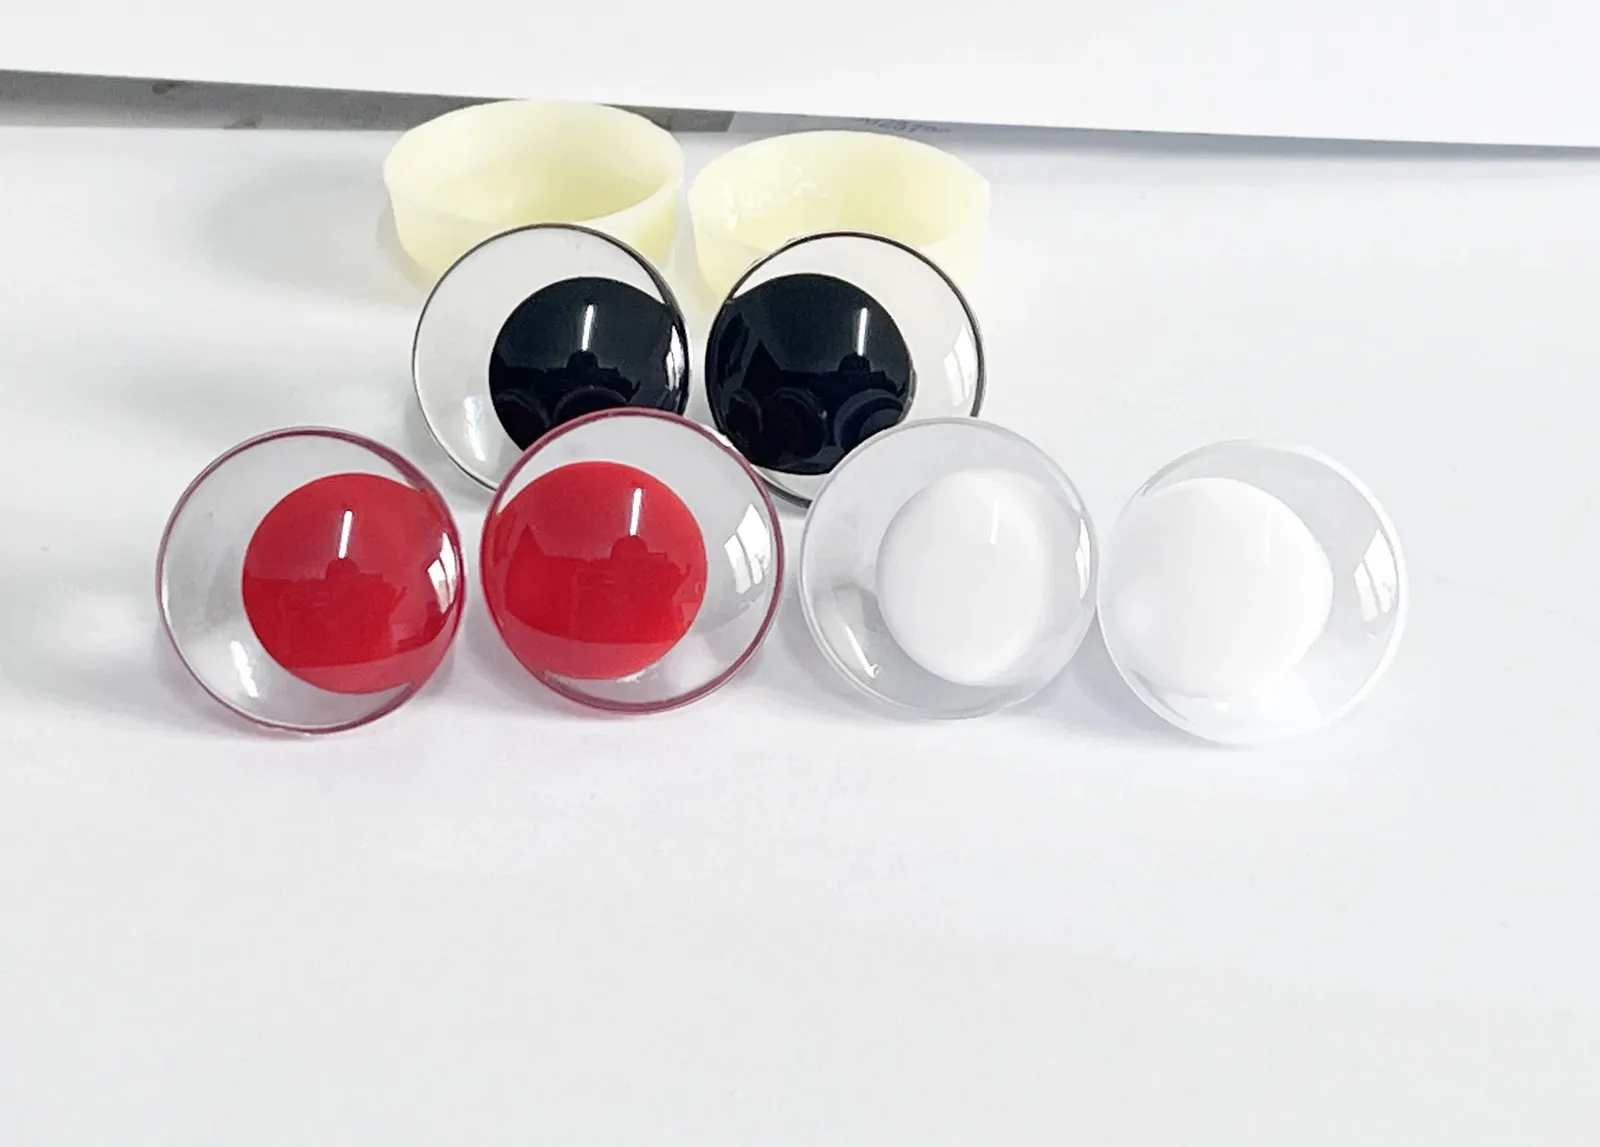 20st 12mm 14 16 18 20 25 30mm 3D Comical Round Clear White Black Red Pupiltoy Eyes Strange Eyes with Hard Washer 240222